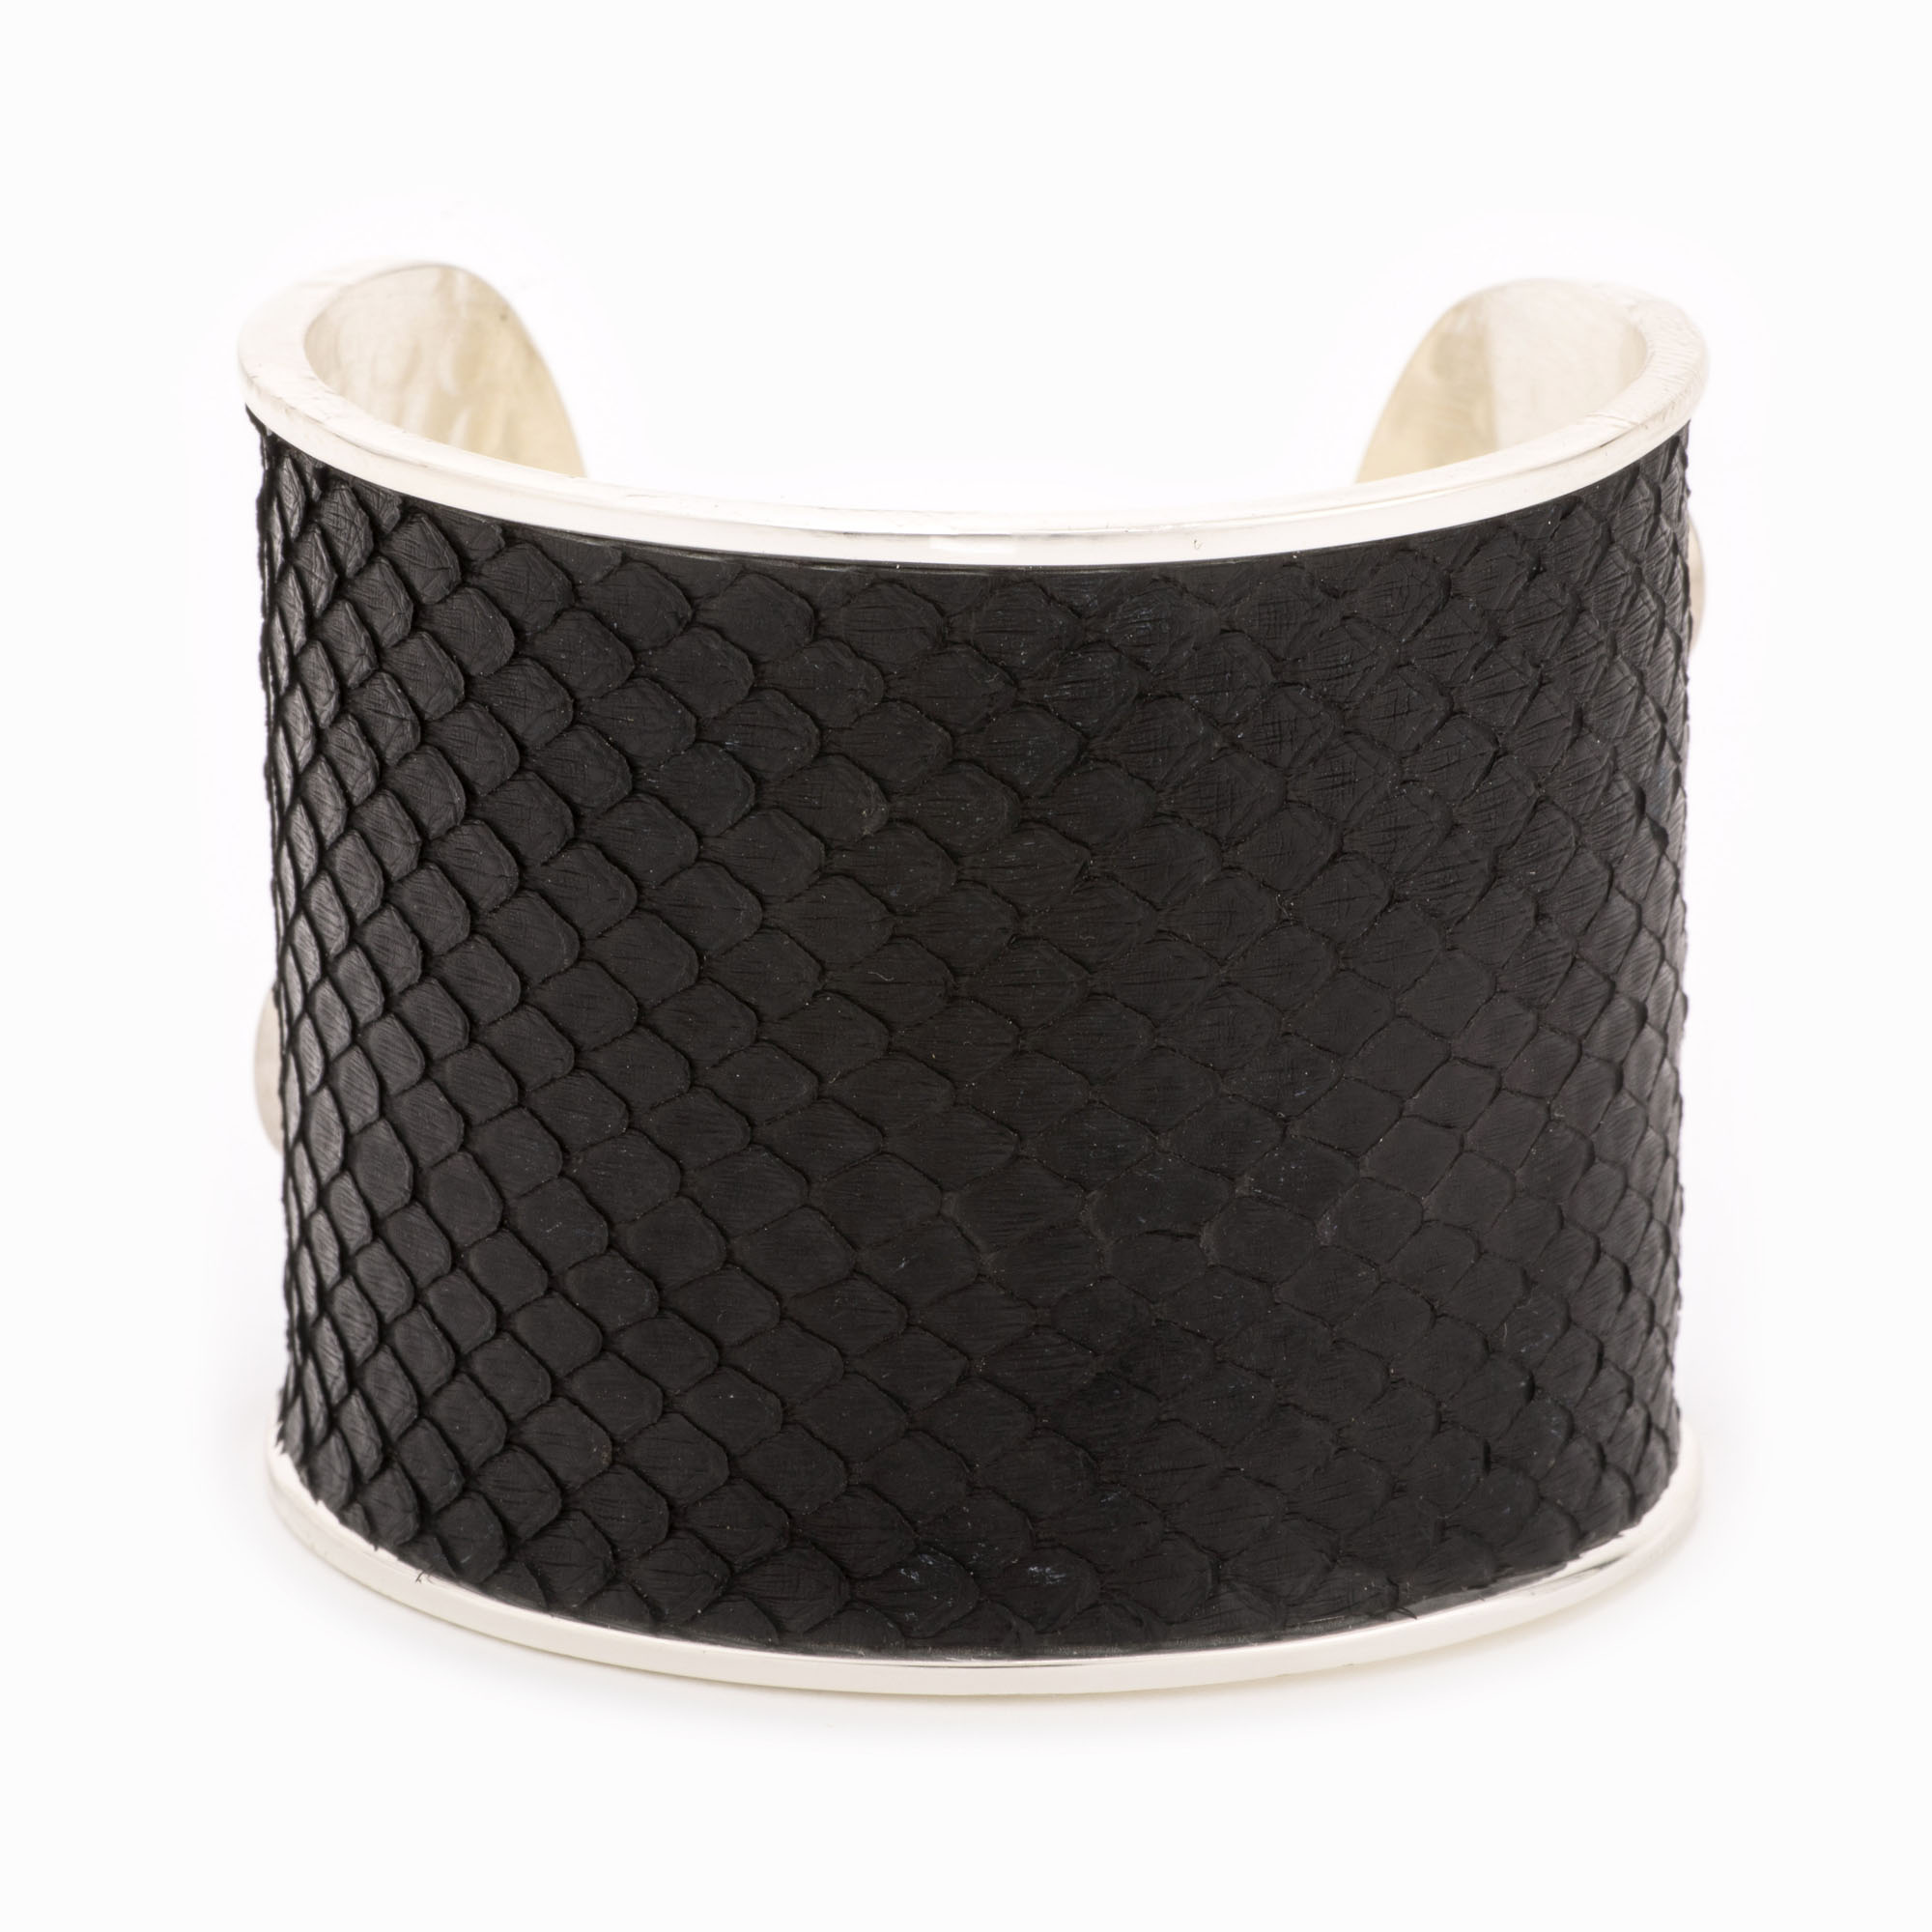 Featured image for “Large Black Silver Cuff”